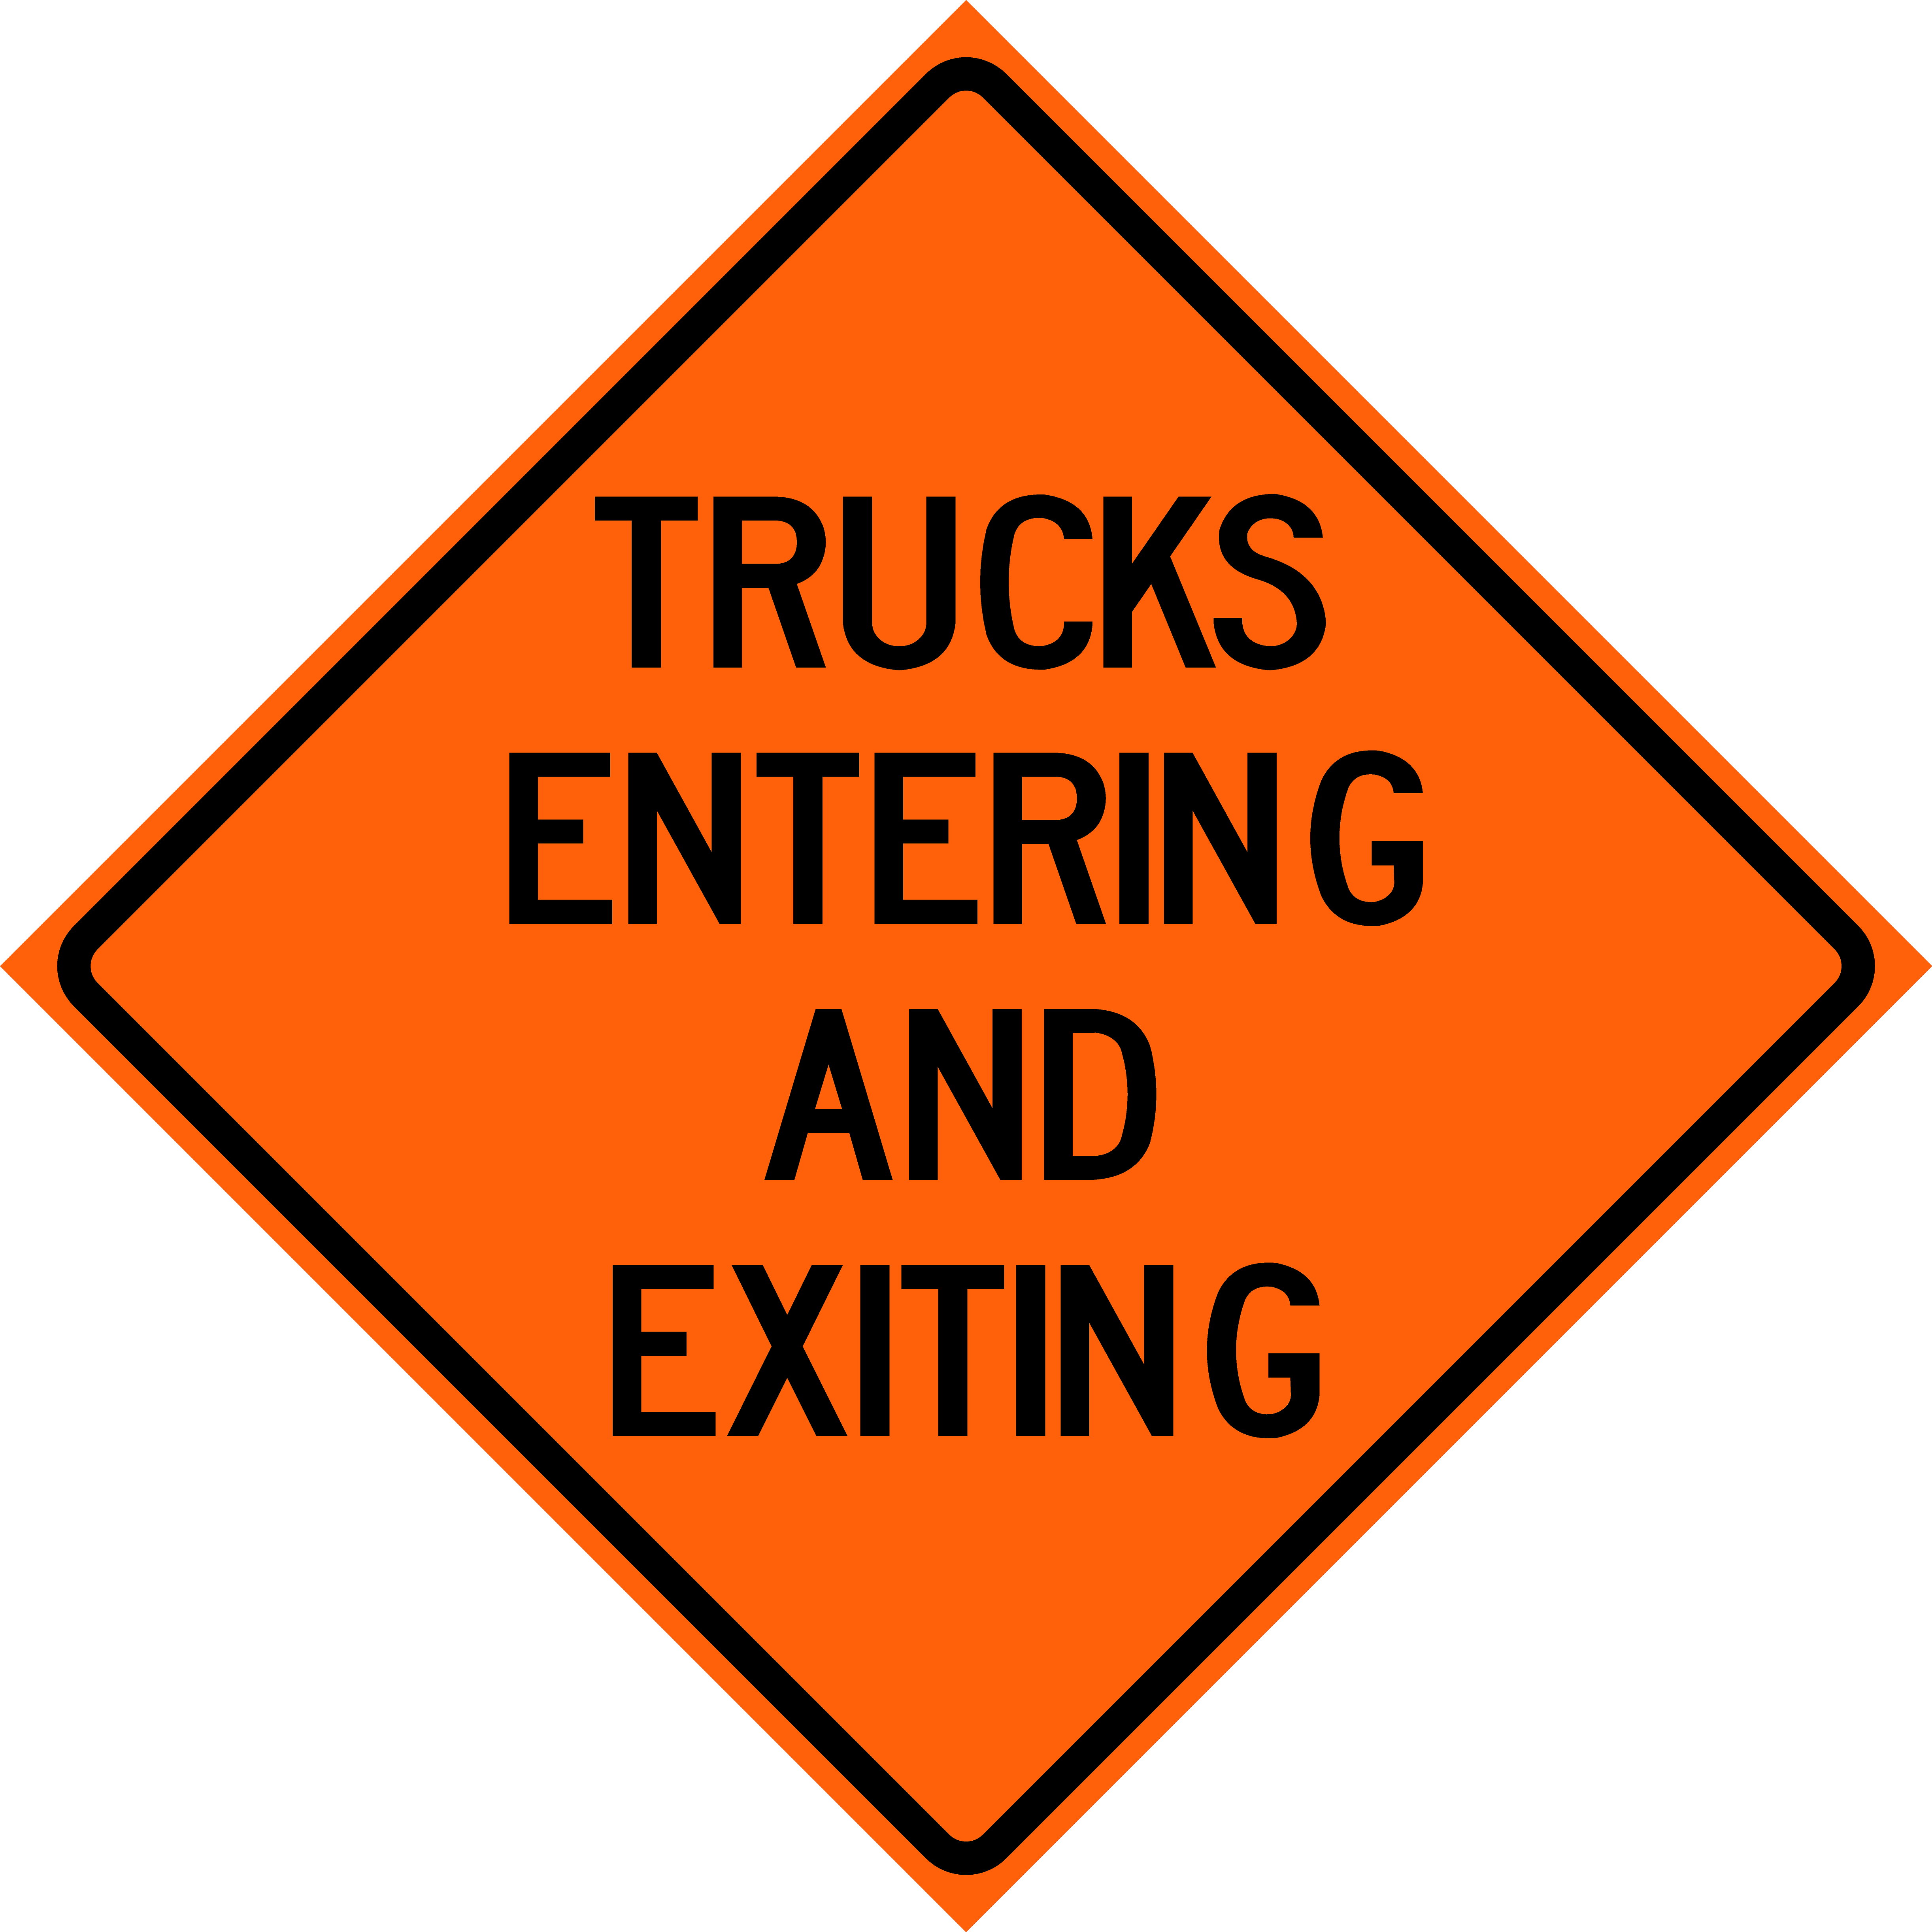 Trucks Entering and Exiting (W8-H6a)